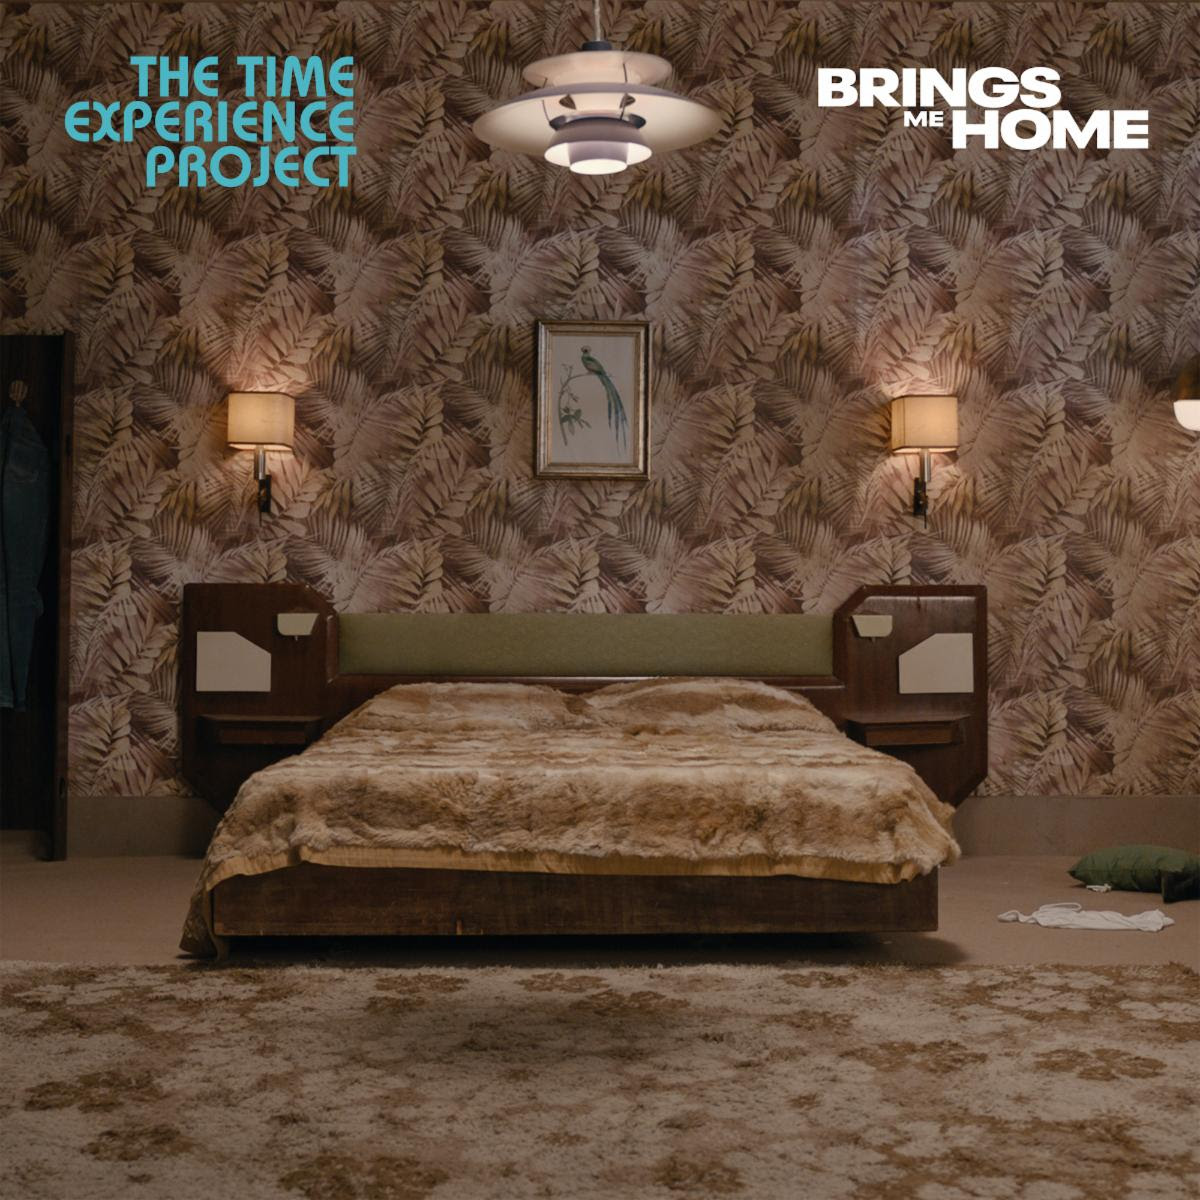 Above: “Brings Me Home” single cover art